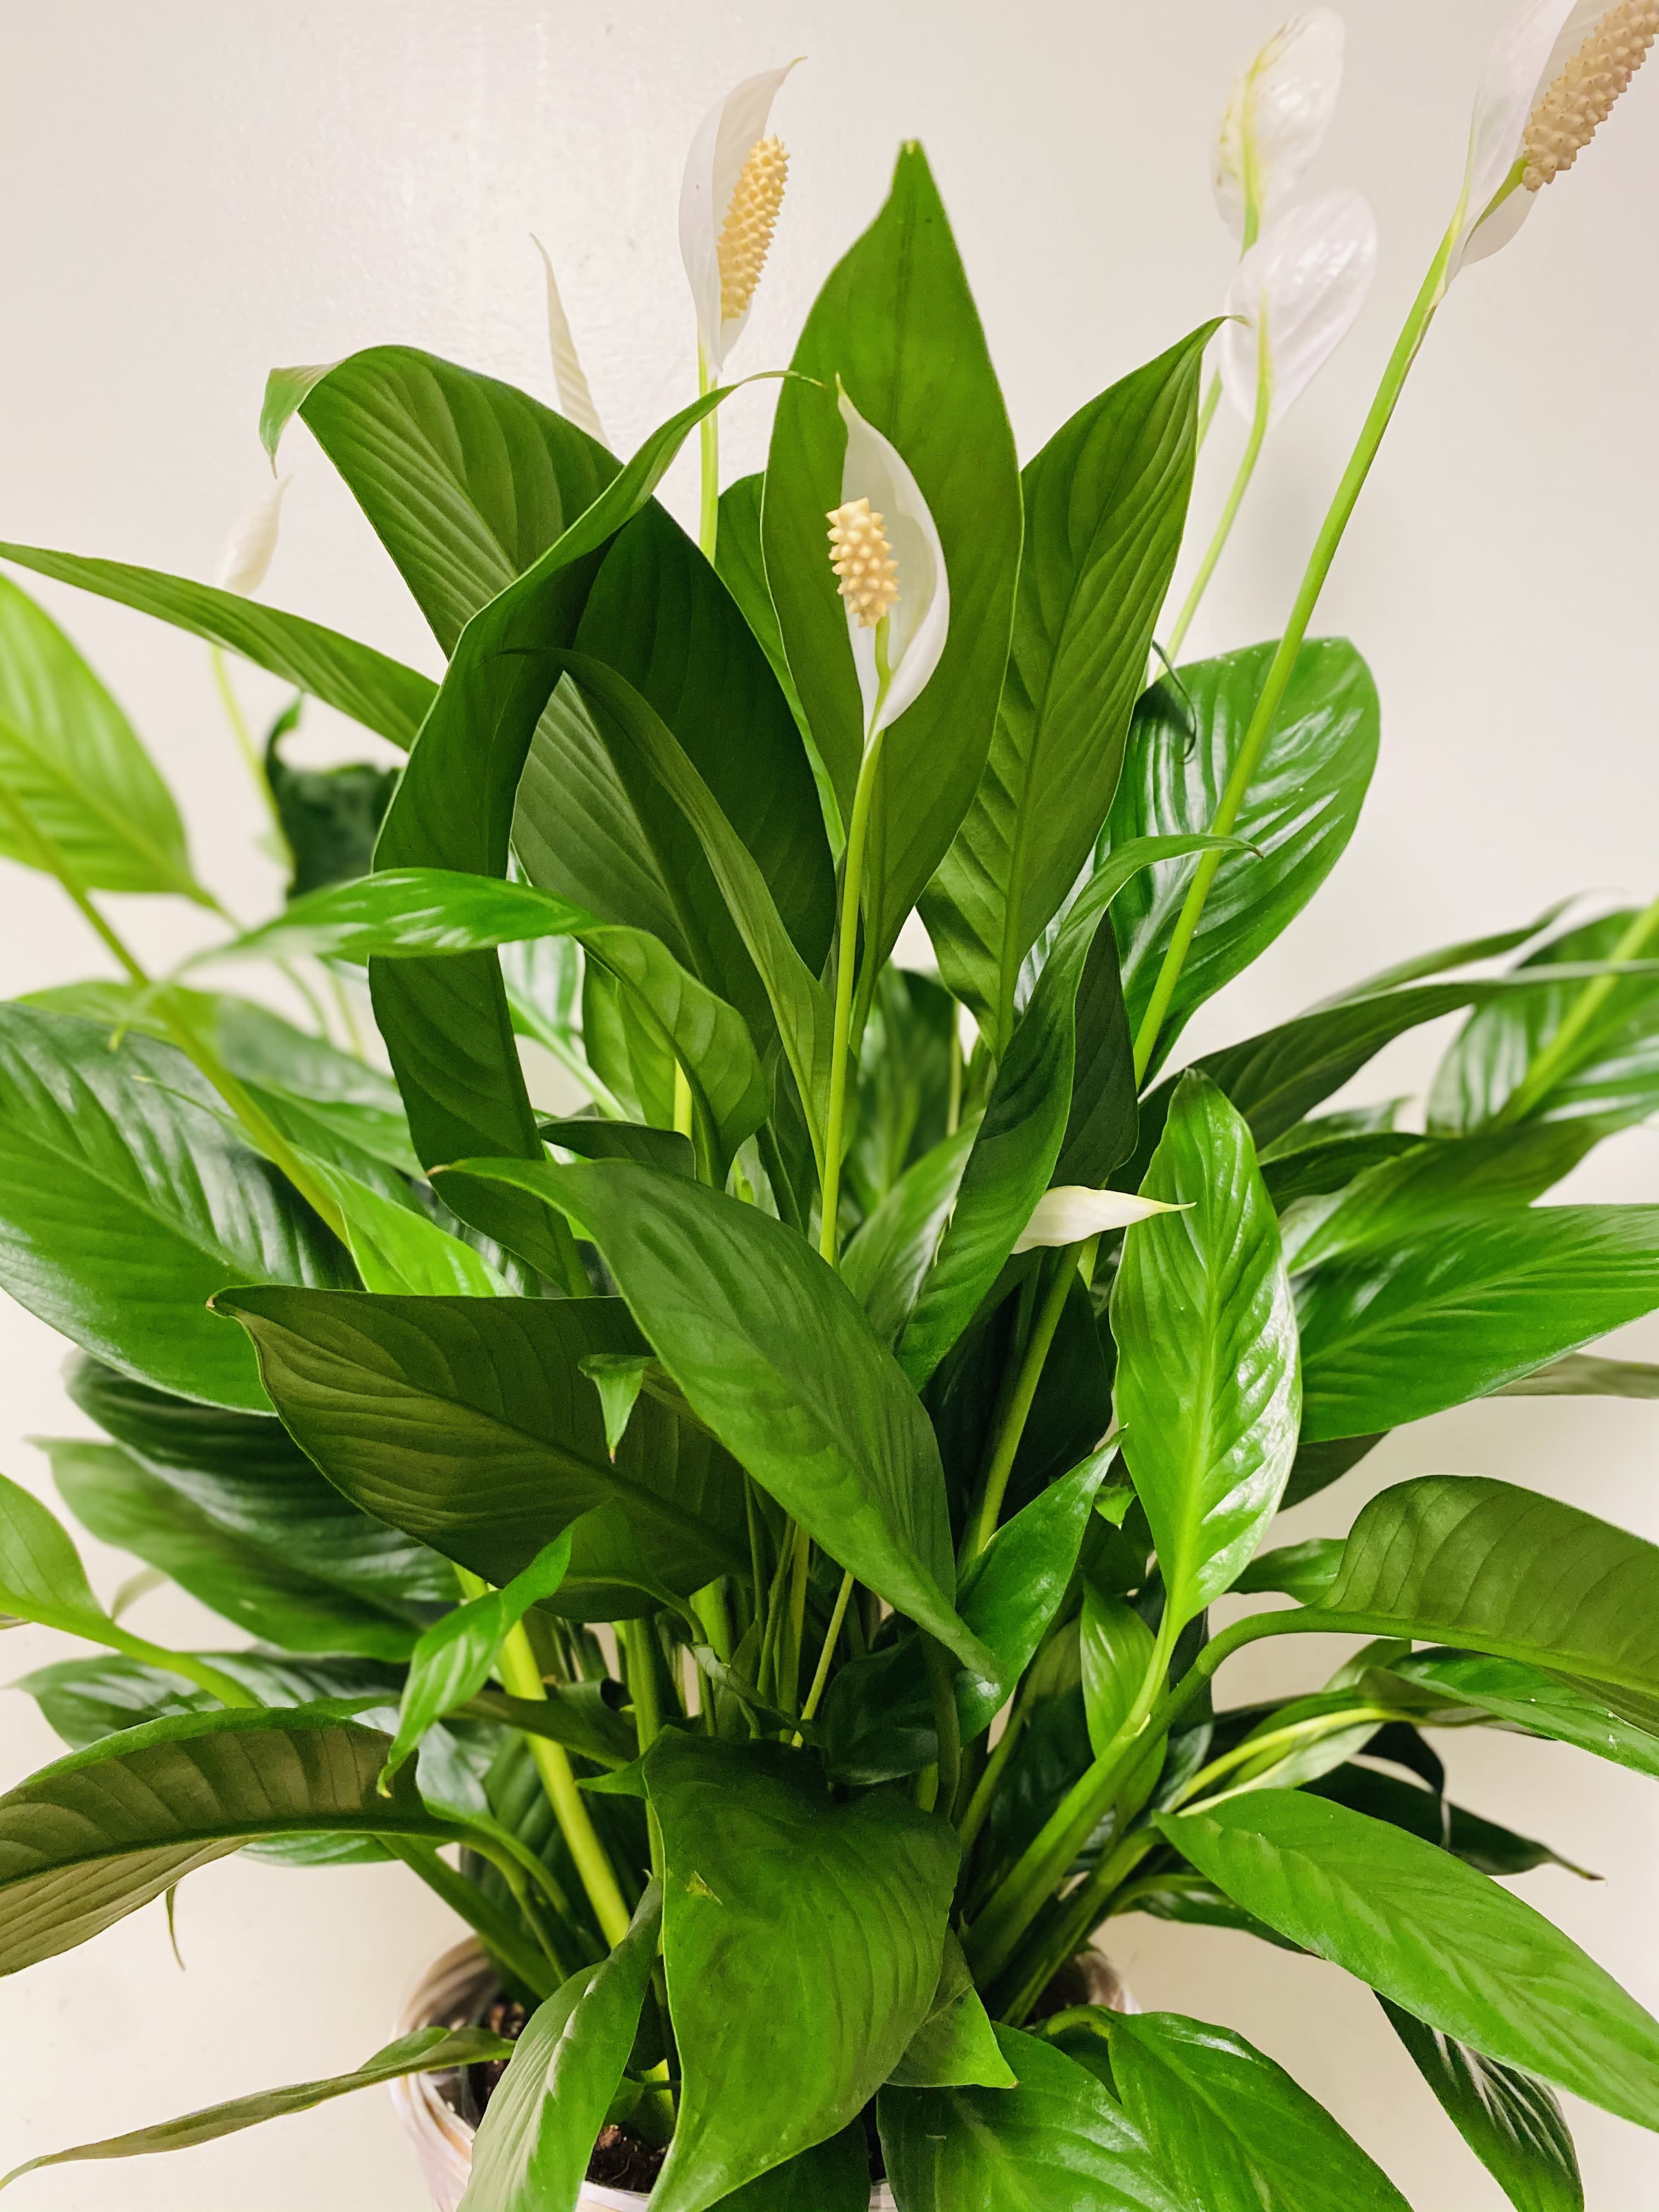 The FTD Spathiphyllum - The FTD Spathiphyllum - delivered in a natural wicker basket.  Commonly known as a Peace Lily and with lush dark green leaves, this plant periodically puts up white flag-like flowers.   Standard: 6 inch pot. Deluxe: 8 inch pot, Premium: 10 inch pot.